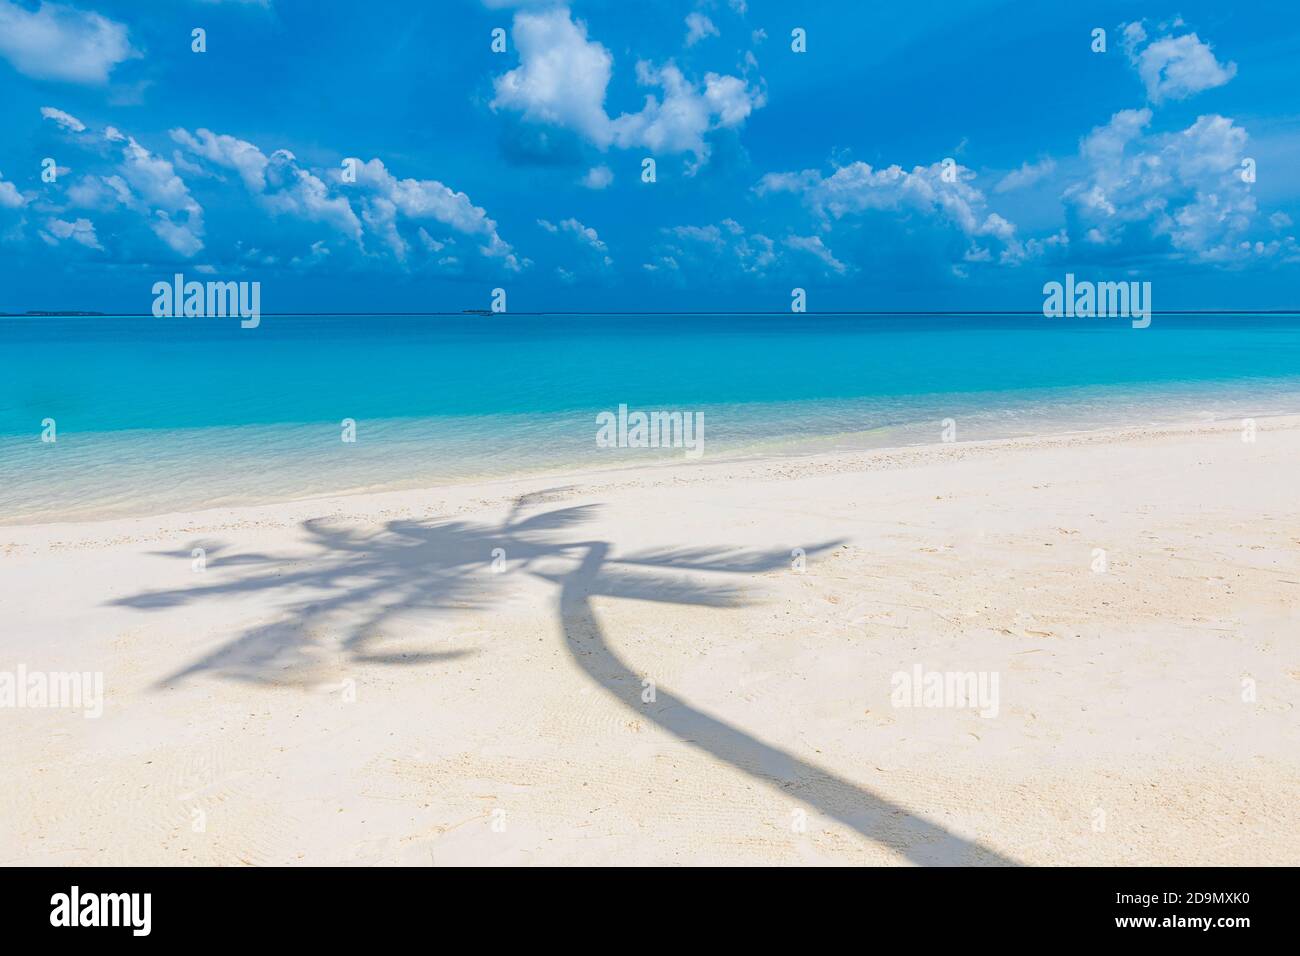 Artistic tropical beach landscape, palm tree leaves shadow. Amazing seascape, exotic nature pattern. Abstract paradise island coast, sunny weather Stock Photo